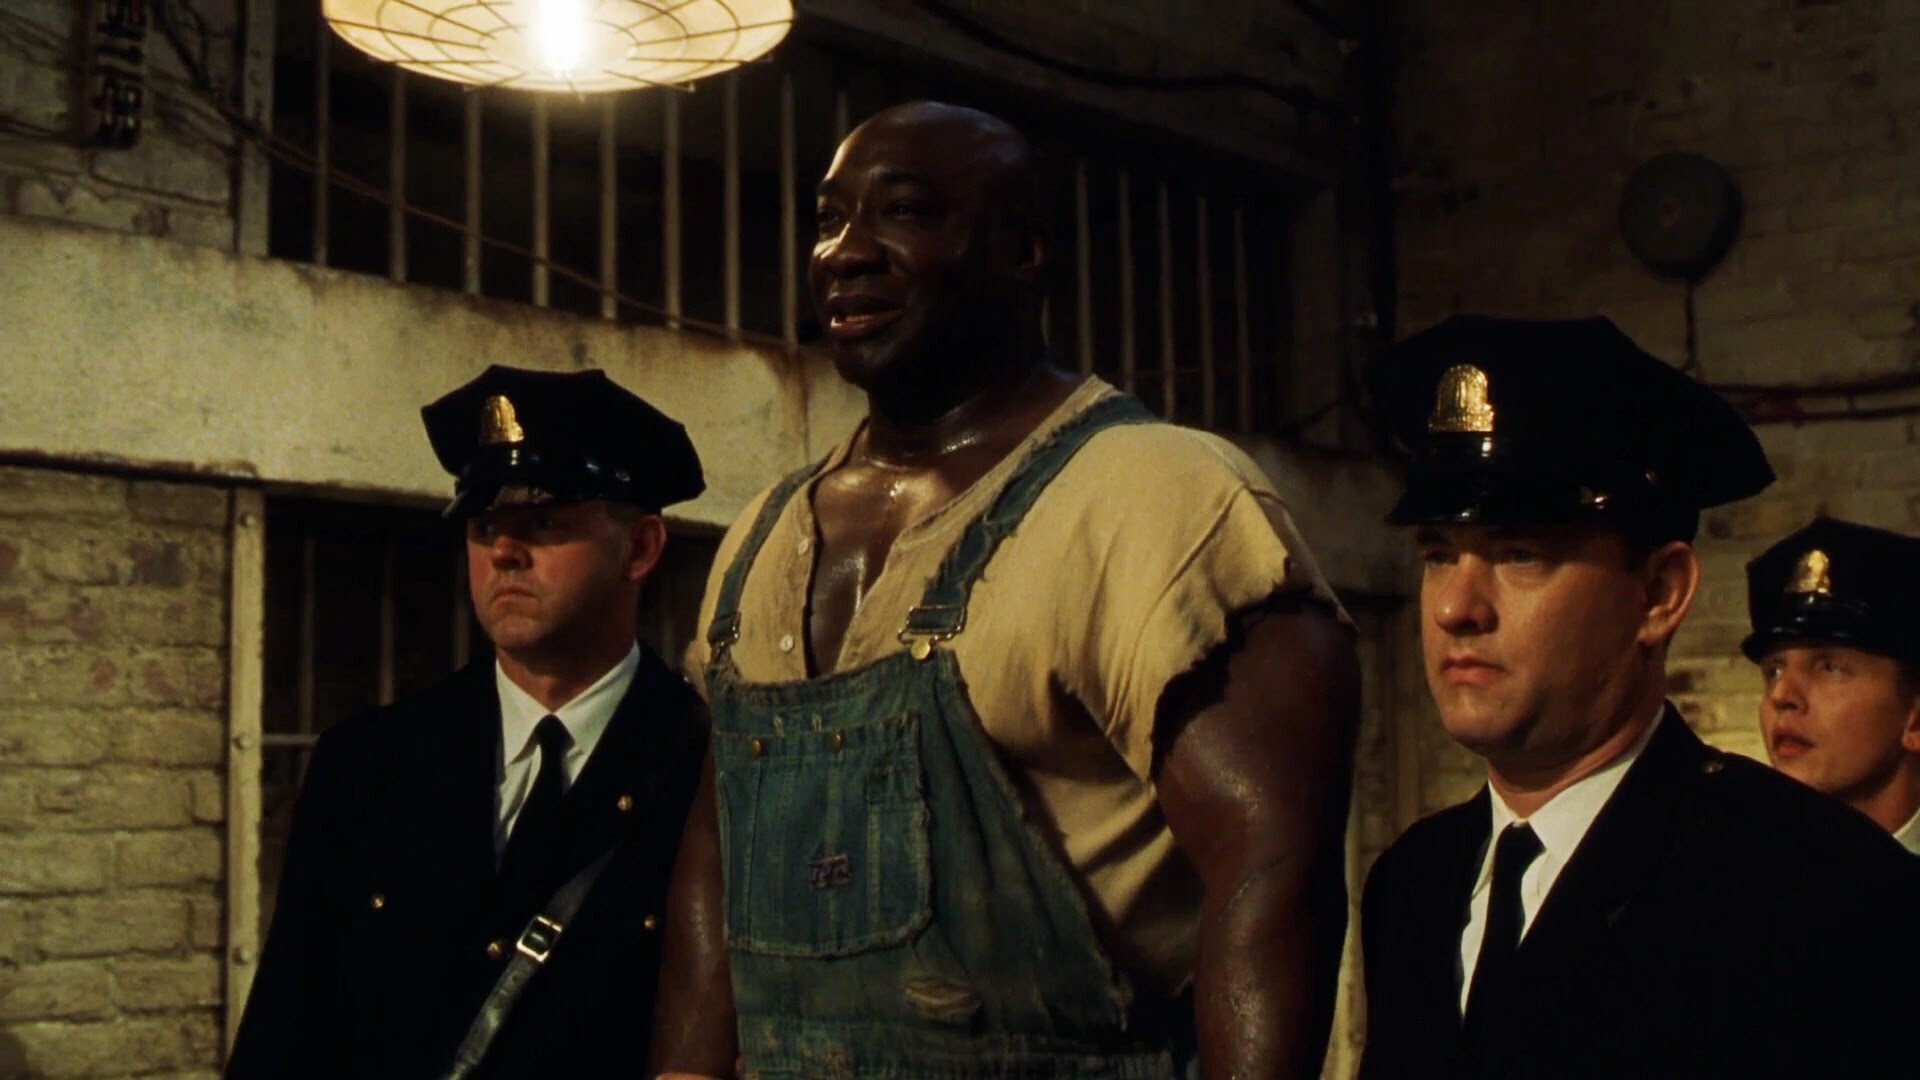 The Green Mile: Michael Clarke Duncan won the Saturn Award for Best Supporting Actor. 1920x1080 Full HD Wallpaper.